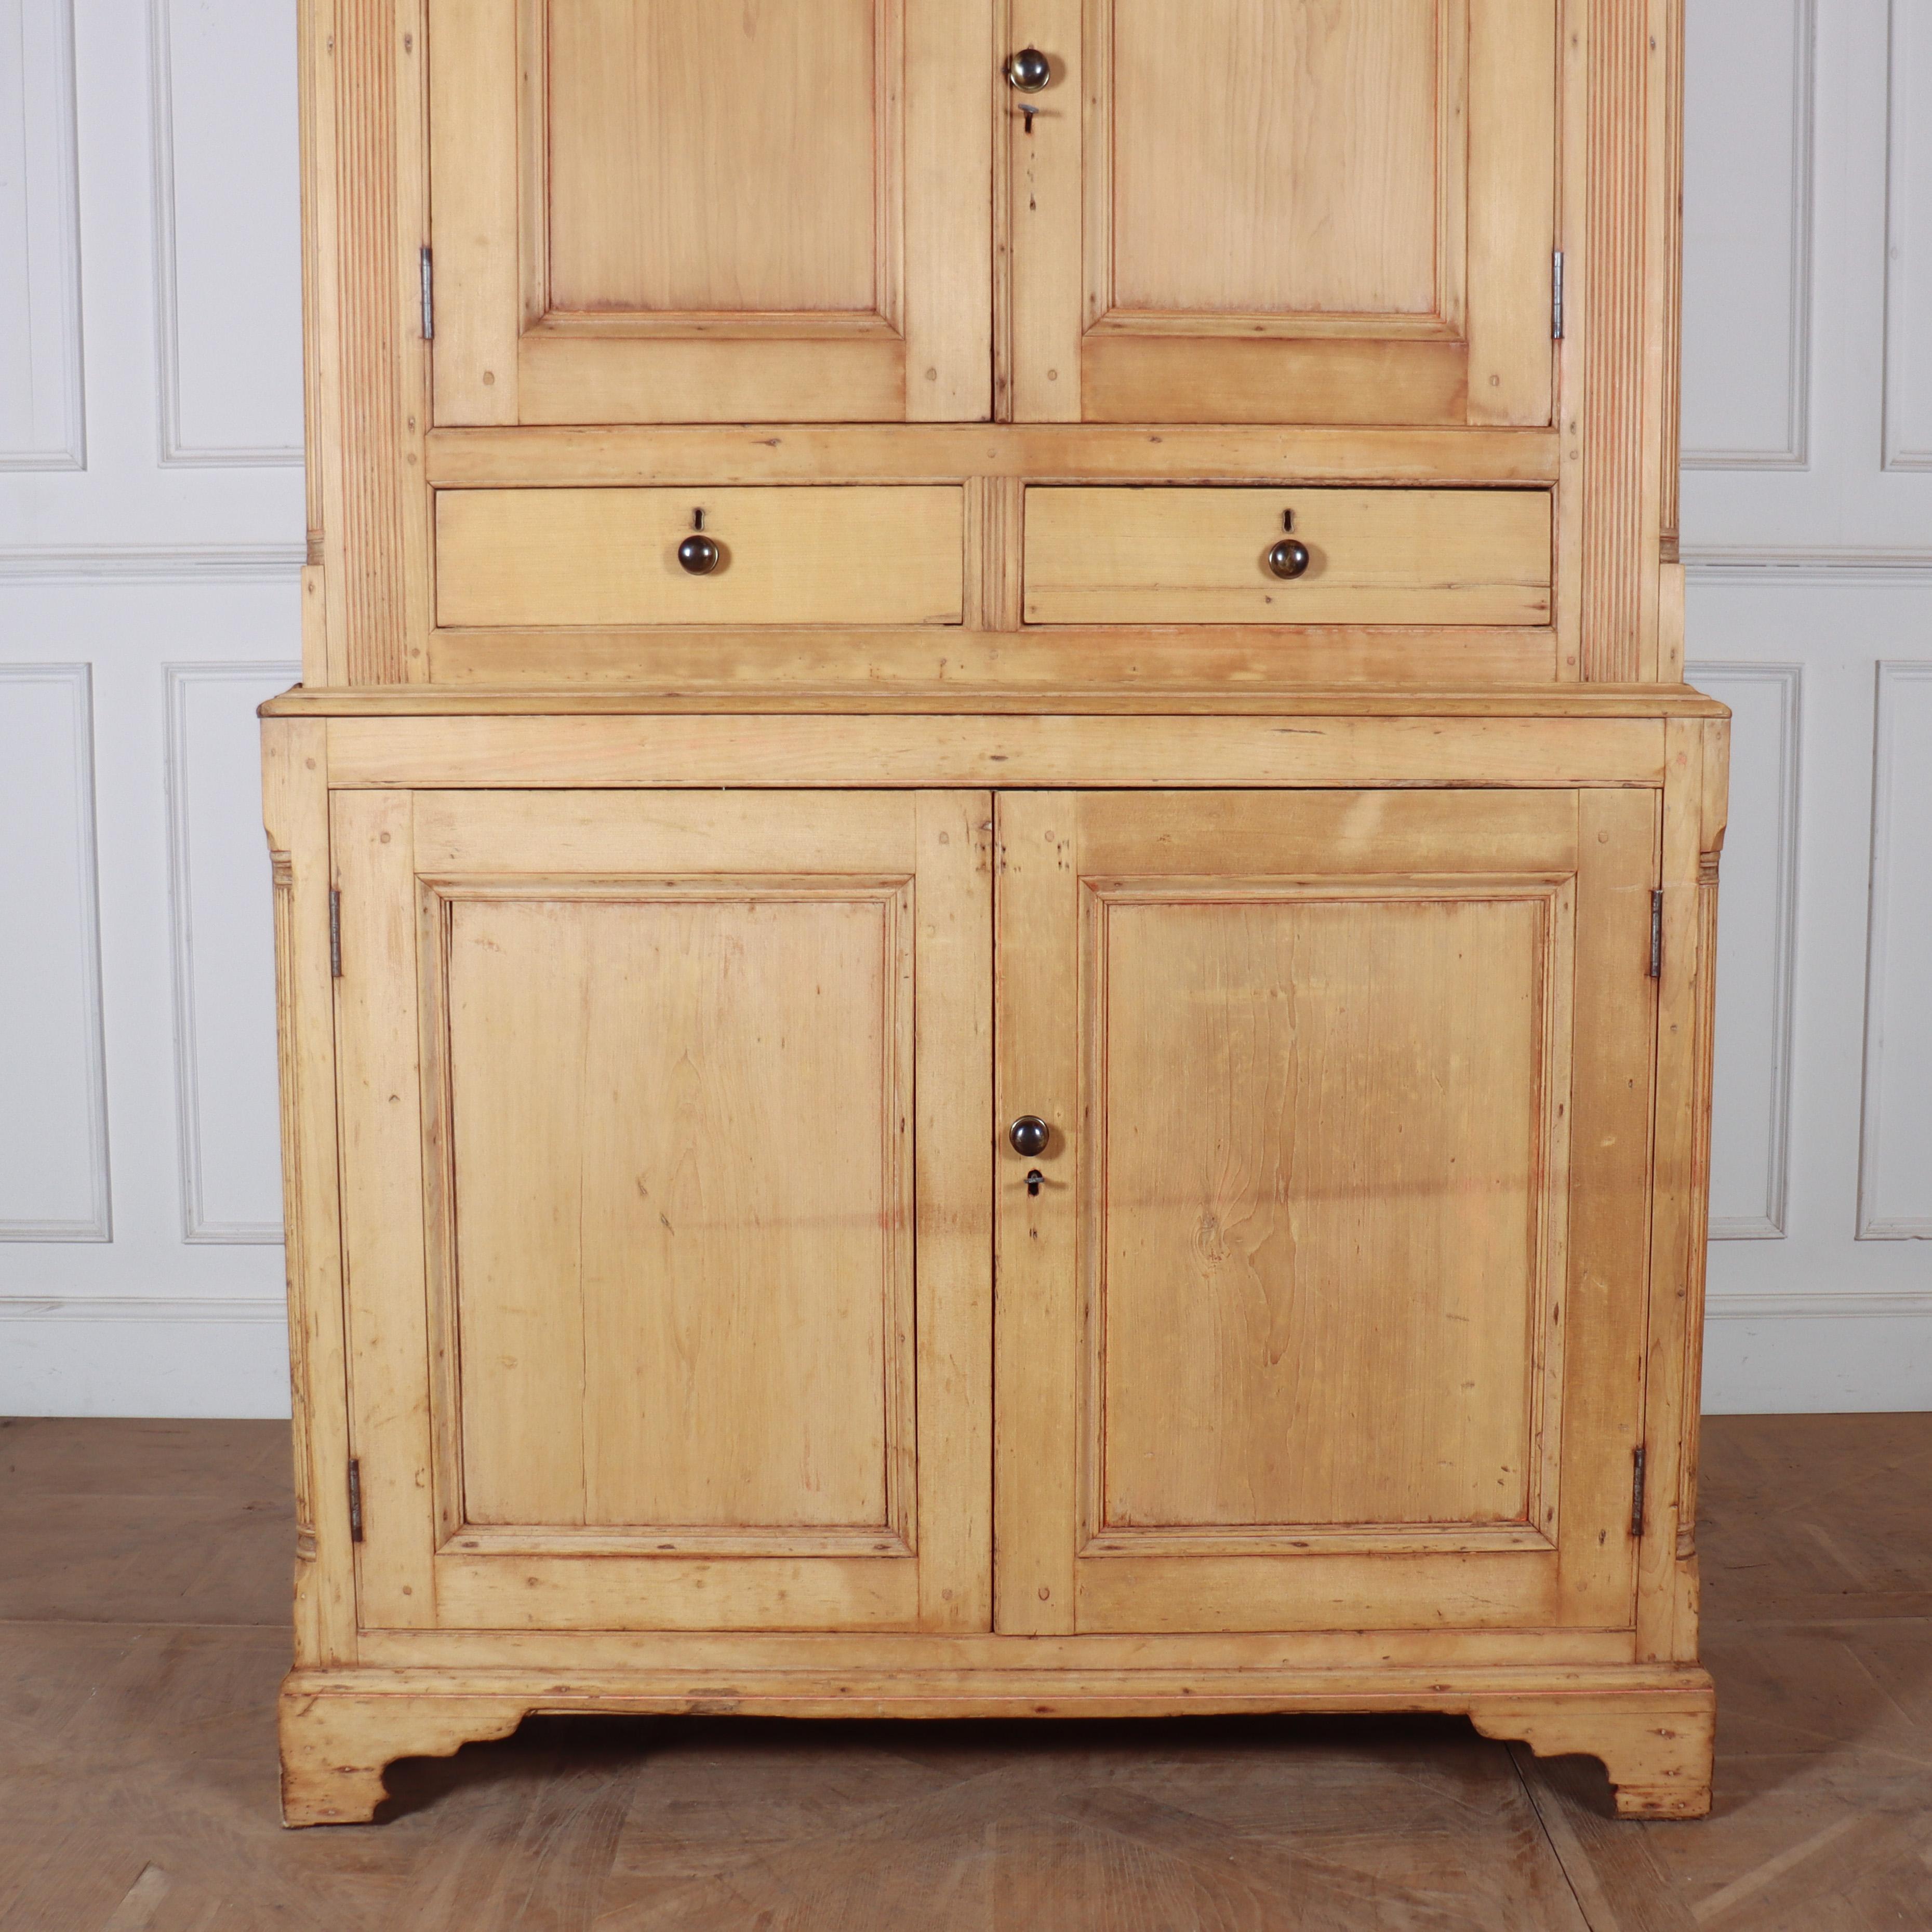 Late 18th C Scottish pine linen cupboard. 1790.

Reference: 8106

Dimensions
52.5 inches (133 cms) Wide
24 inches (61 cms) Deep
78 inches (198 cms) High